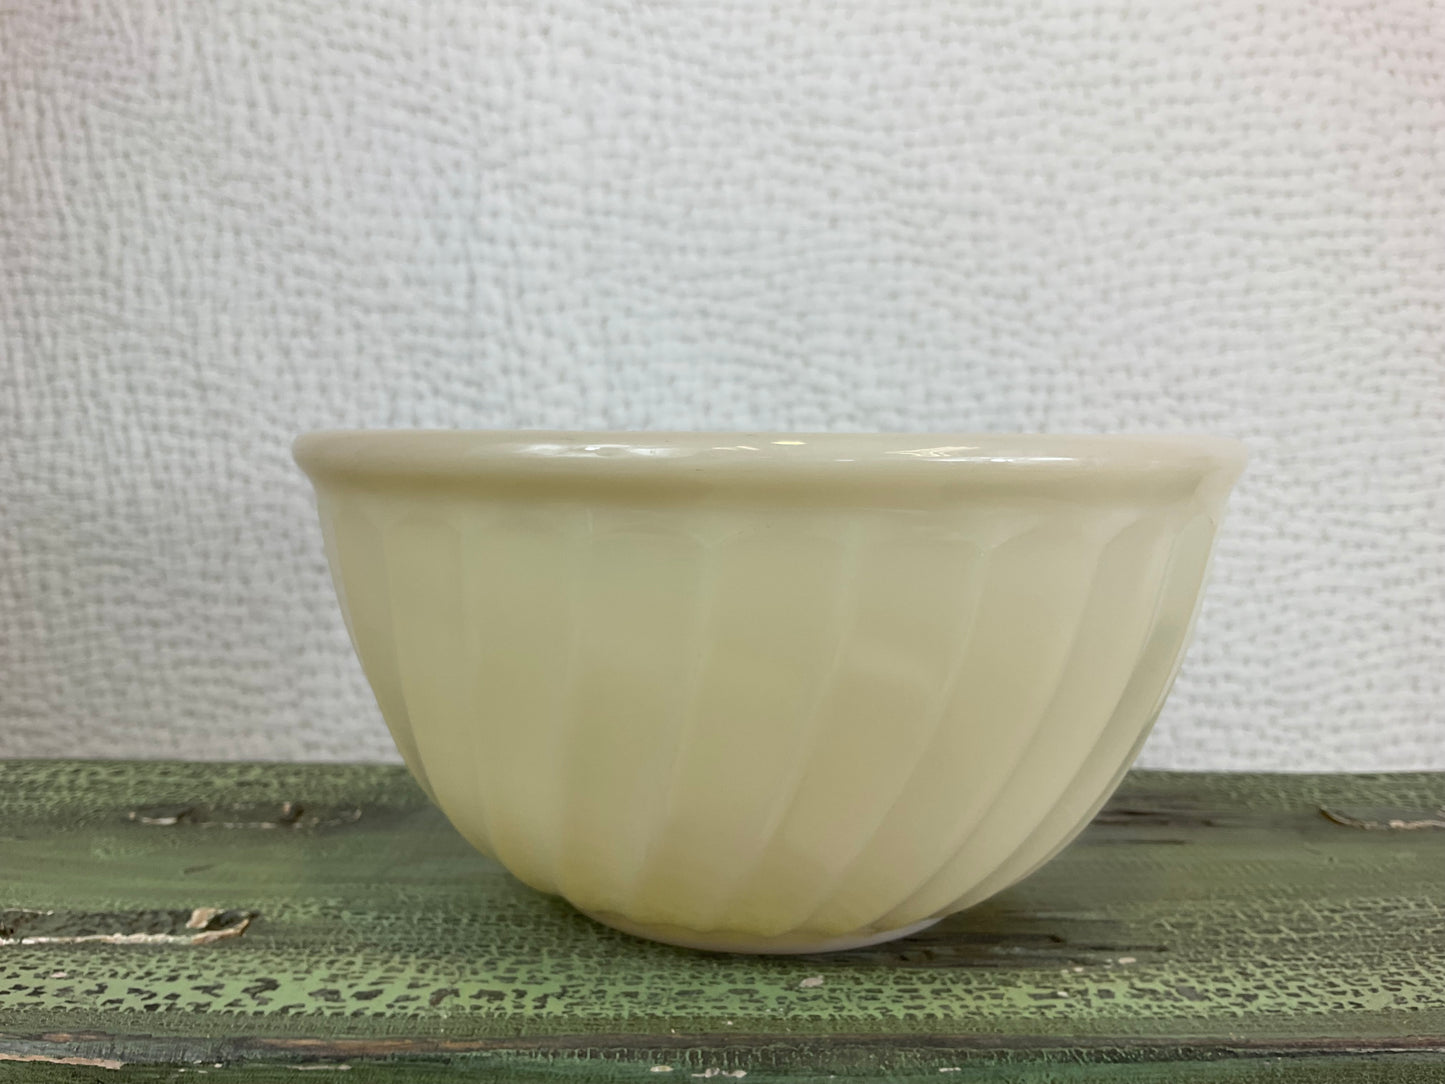 Fire King Mixing Bowls, Cream colored 2Pc